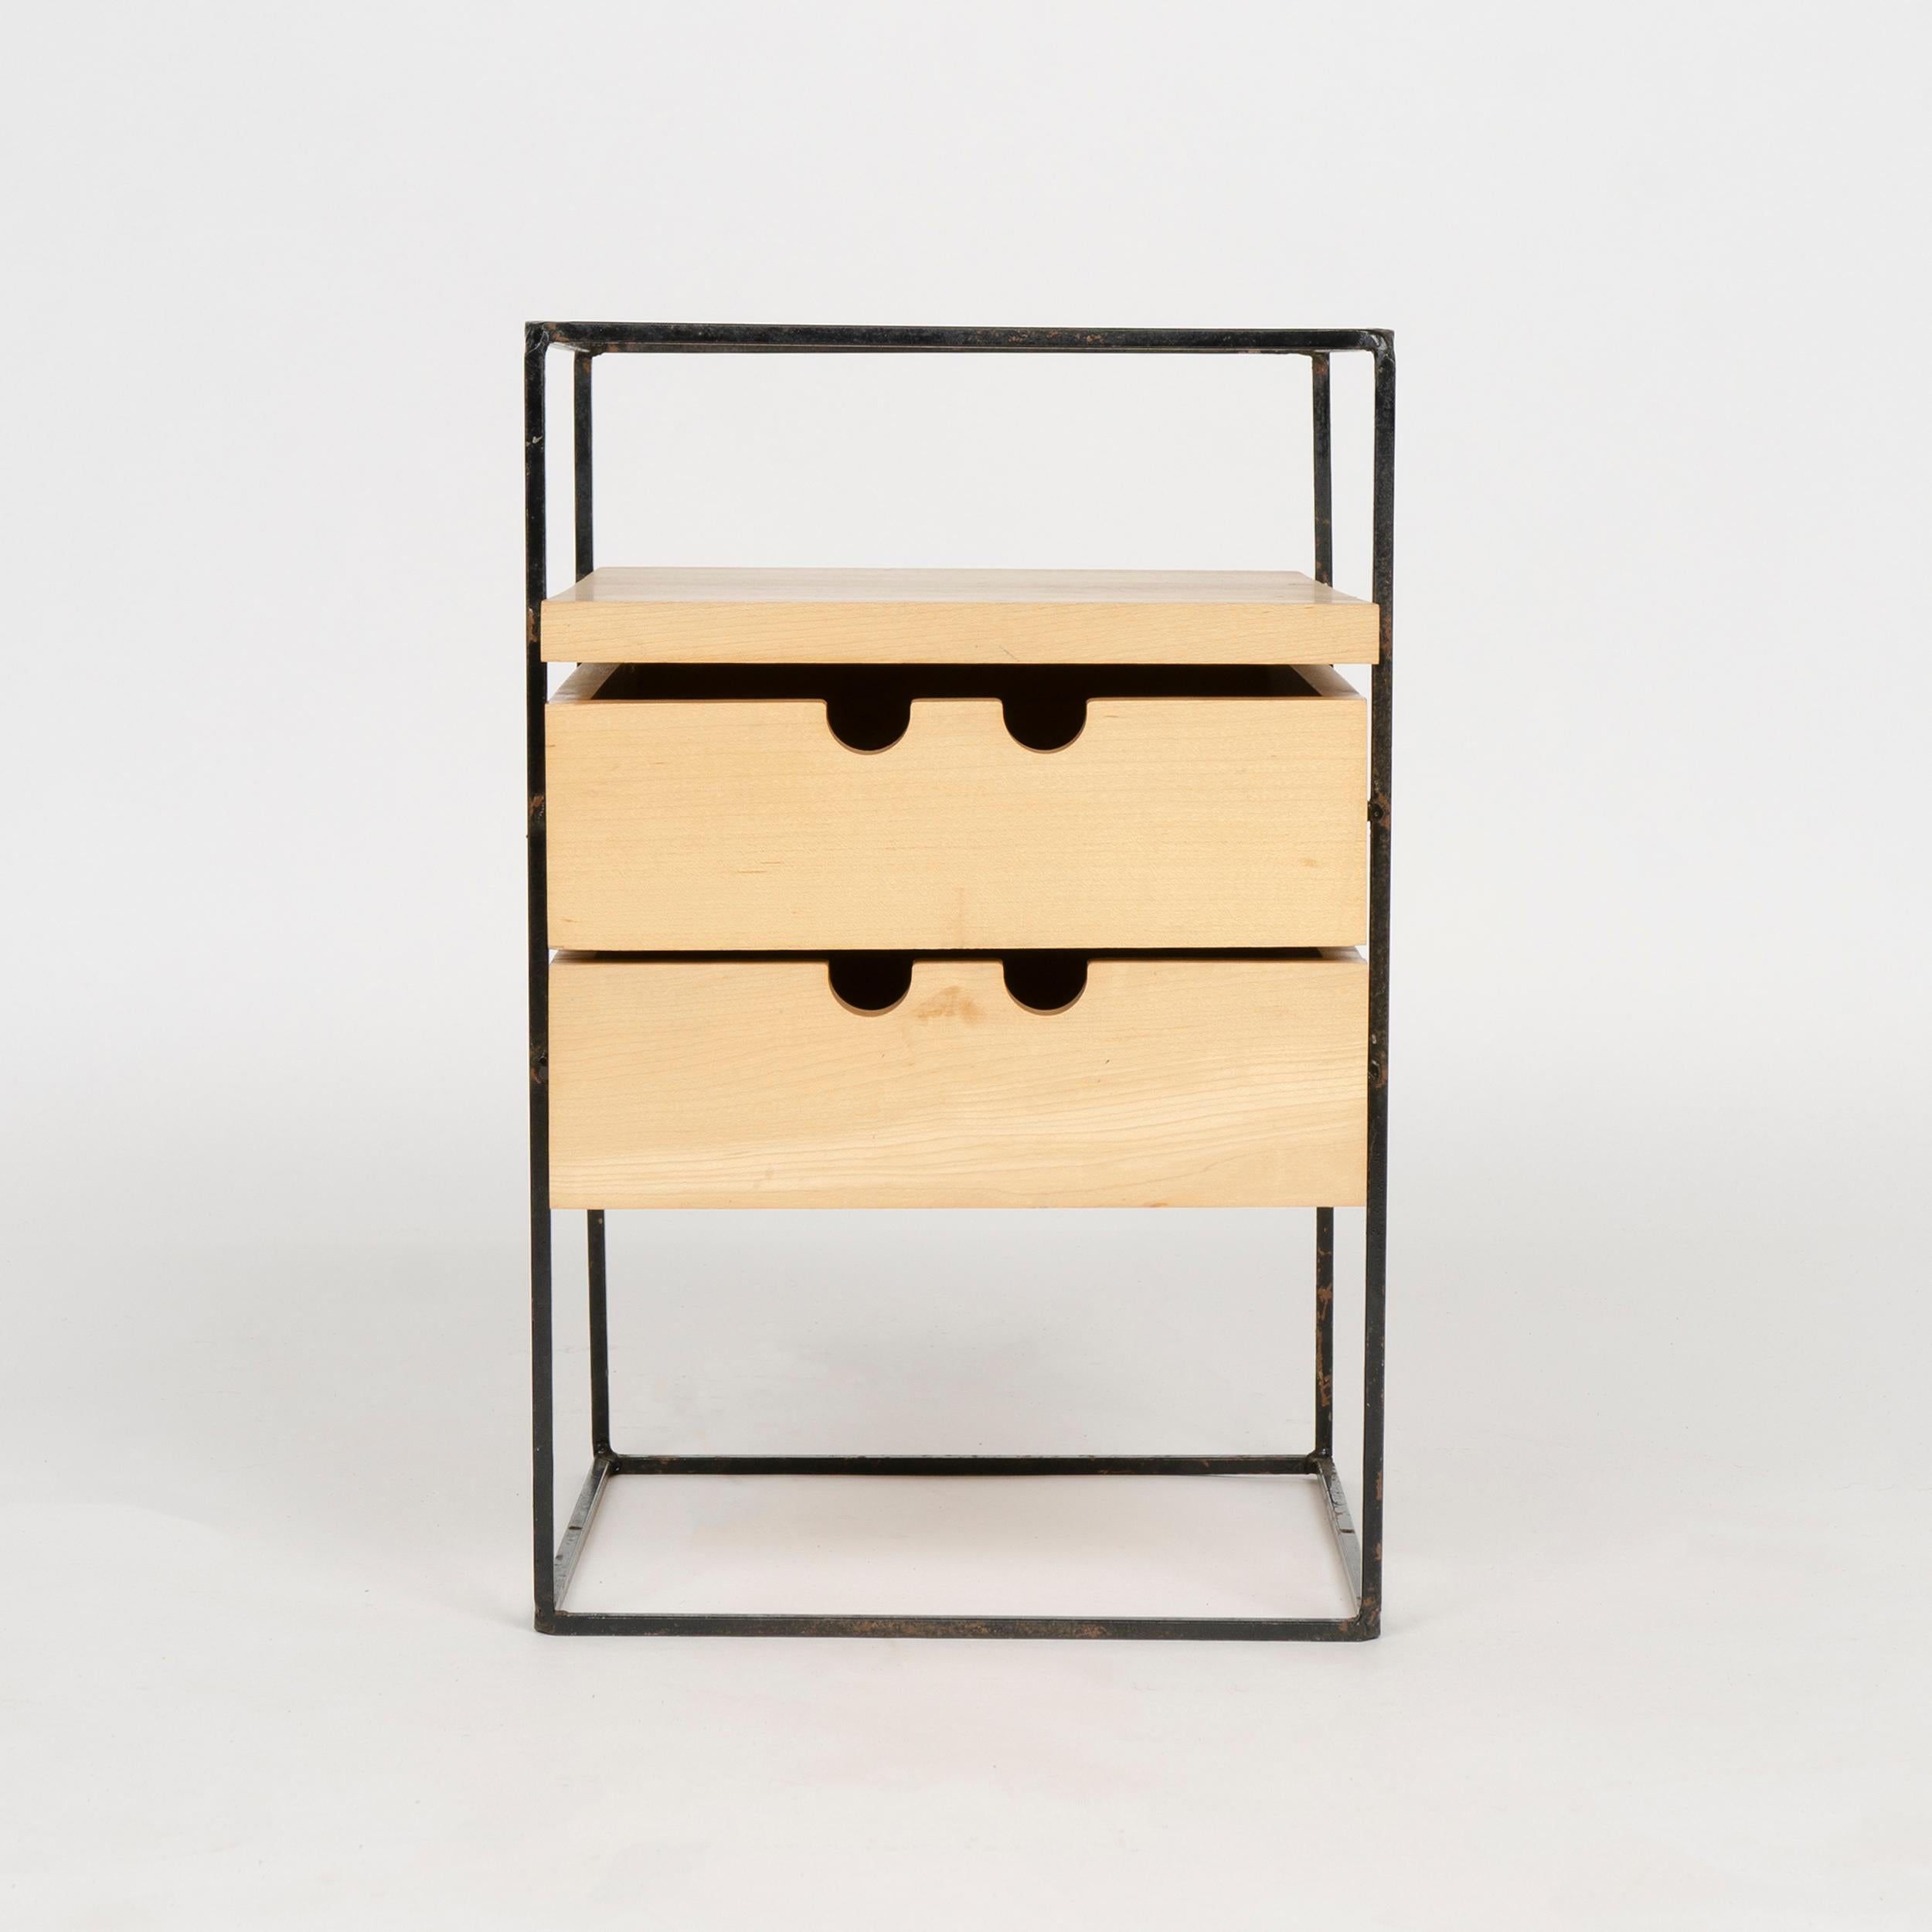 A small table top maple storage unit with two drawers supported by a black steel frame base. This desk organizer is a product from the Planner Group, a coordinated contemporary furniture group, designed by Paul McCobb and made in the USA.